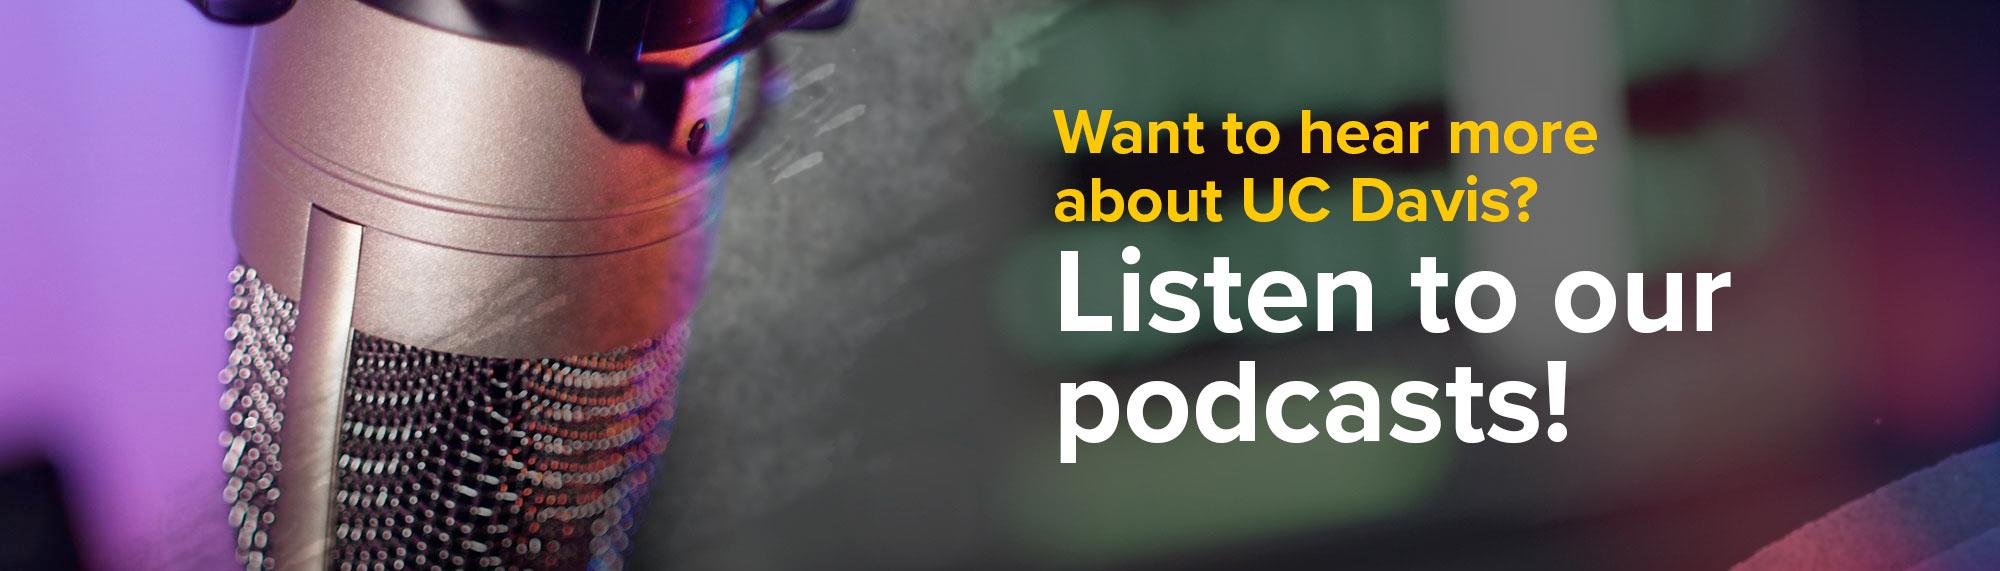 Want to hear more about TV? Listen to our podcasts!